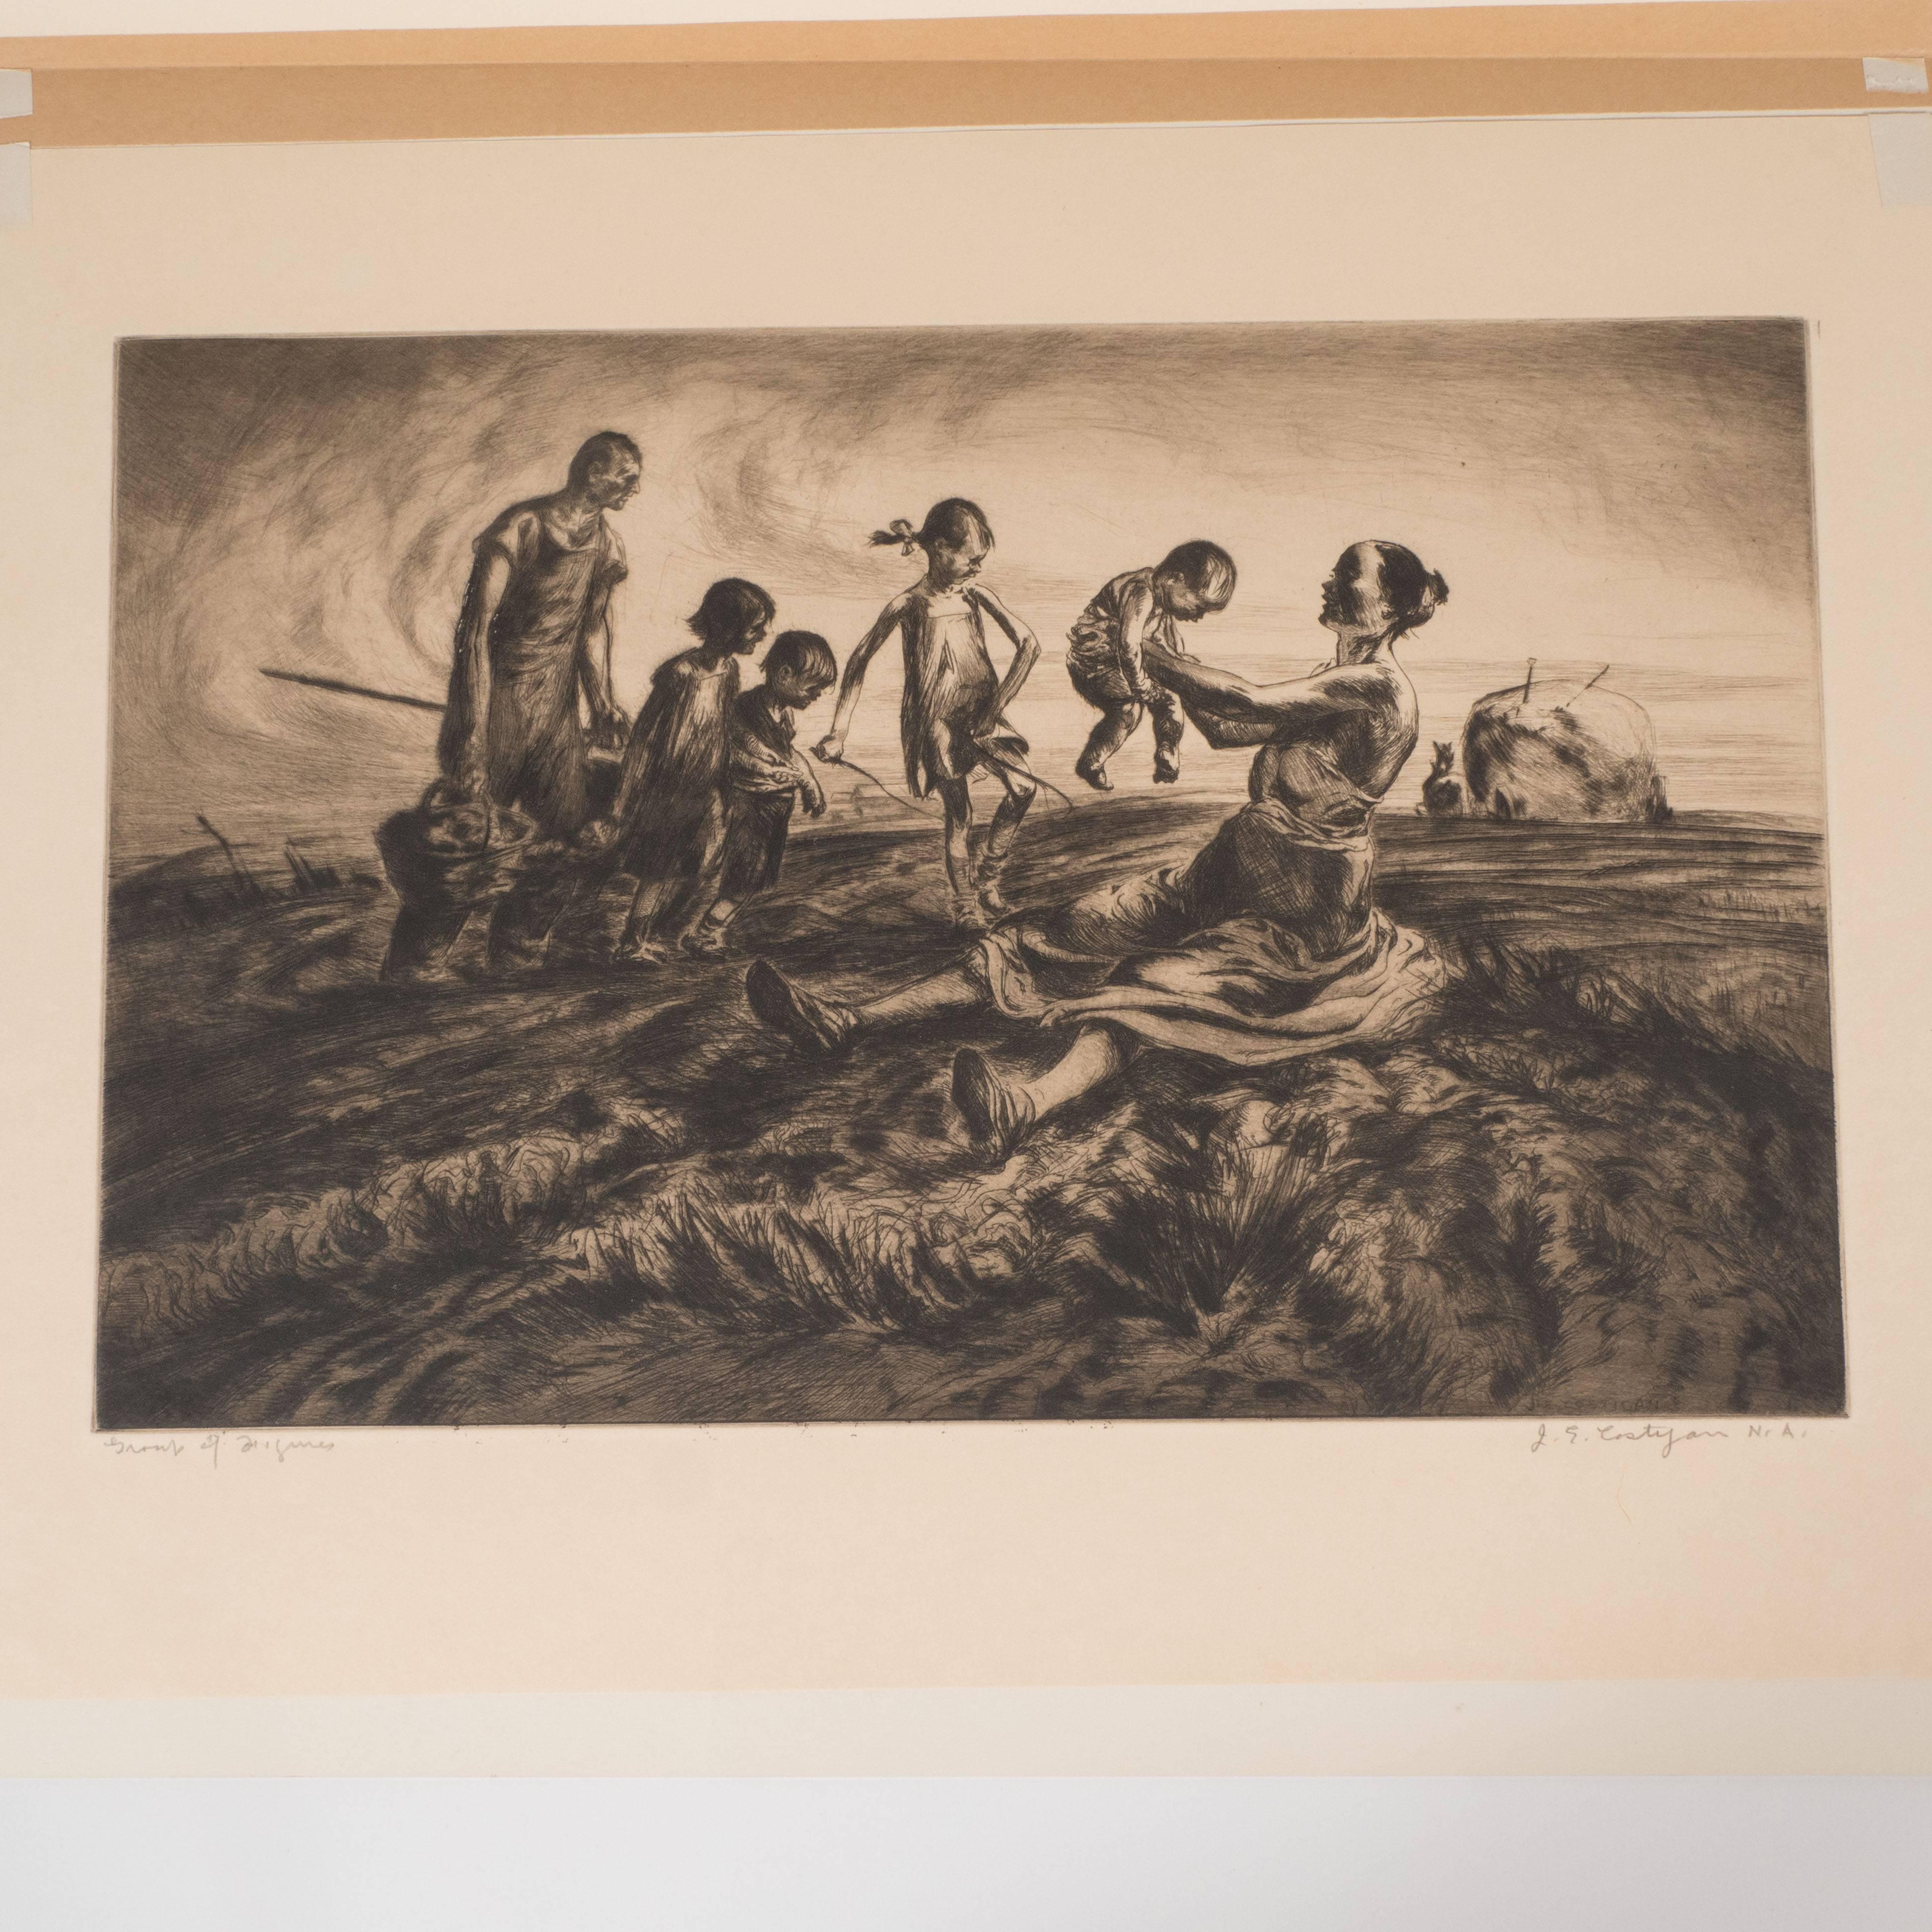 This original, limited edition etching, was realized by the esteemed American artist John E. Costigan, circa 1930. He is represented in the collections of the Metropolitan Museum, the Philips Memorial Gallery in Washington and the Brooklyn Museum,